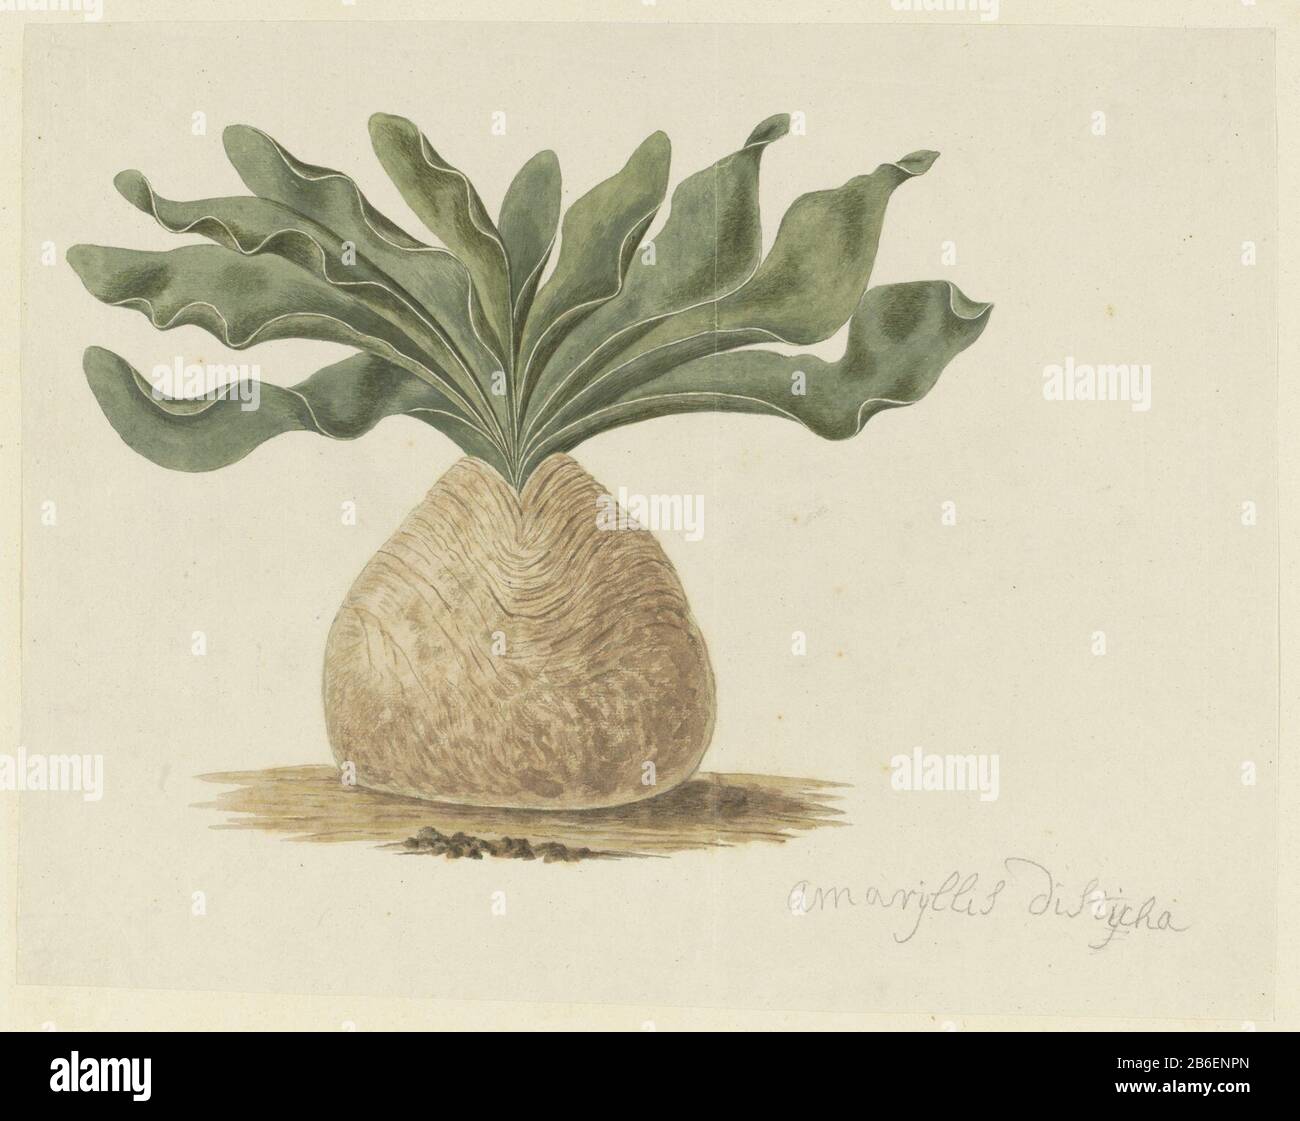 Boophone haemanthoides FM Leighton Amaryllis distycha (titel op object) Boophone haemanthoides P.M. LeightonAmaryllis distycha (title object) Property Type: Drawing album leaf Item number: RP-T-1914-18-53 Inscriptions / Brands: annotation, bottom right, pencil: 'Amaryllis distycha (in unknown handwriting) Description: Boophone haemanthoides P.M. Leighton or B. disticha (.f.) Herb. Manufacturer : artist: Robert Jacob Gordon Date: Oct 1777 - mar-1786 Physical features: brush in watercolor in colors, pencil and black chalk material: paper pencil crayons watercolor technique: Brush size: album she Stock Photo